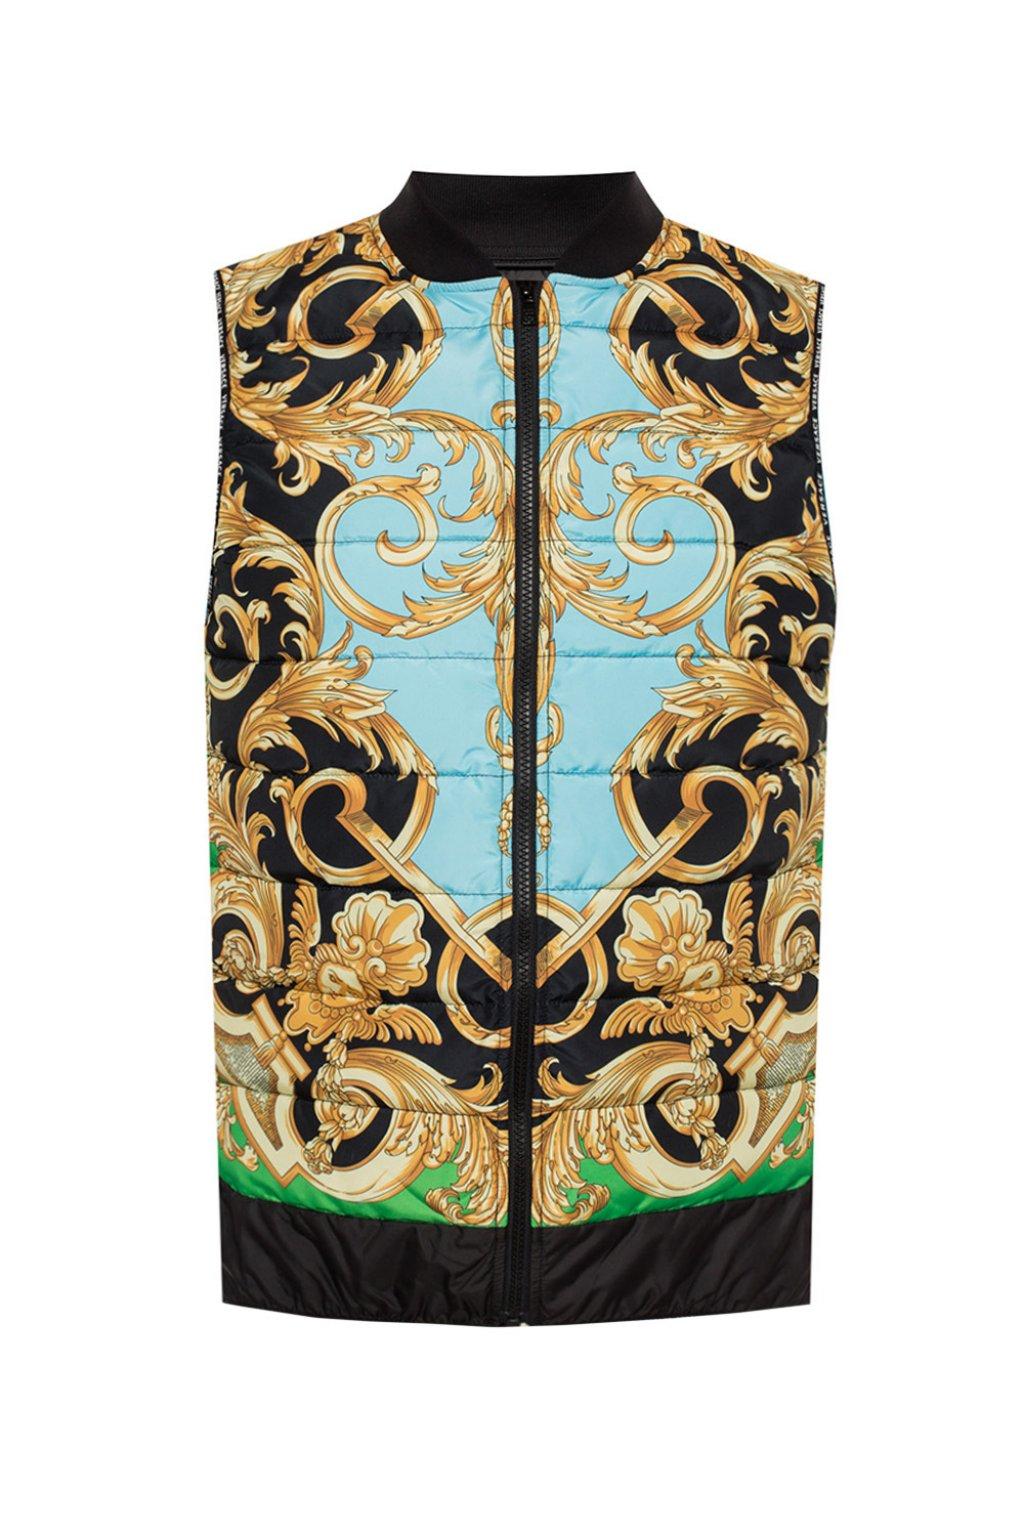 Versace Synthetic Baroque Motif Quilted Vest for Men - Lyst